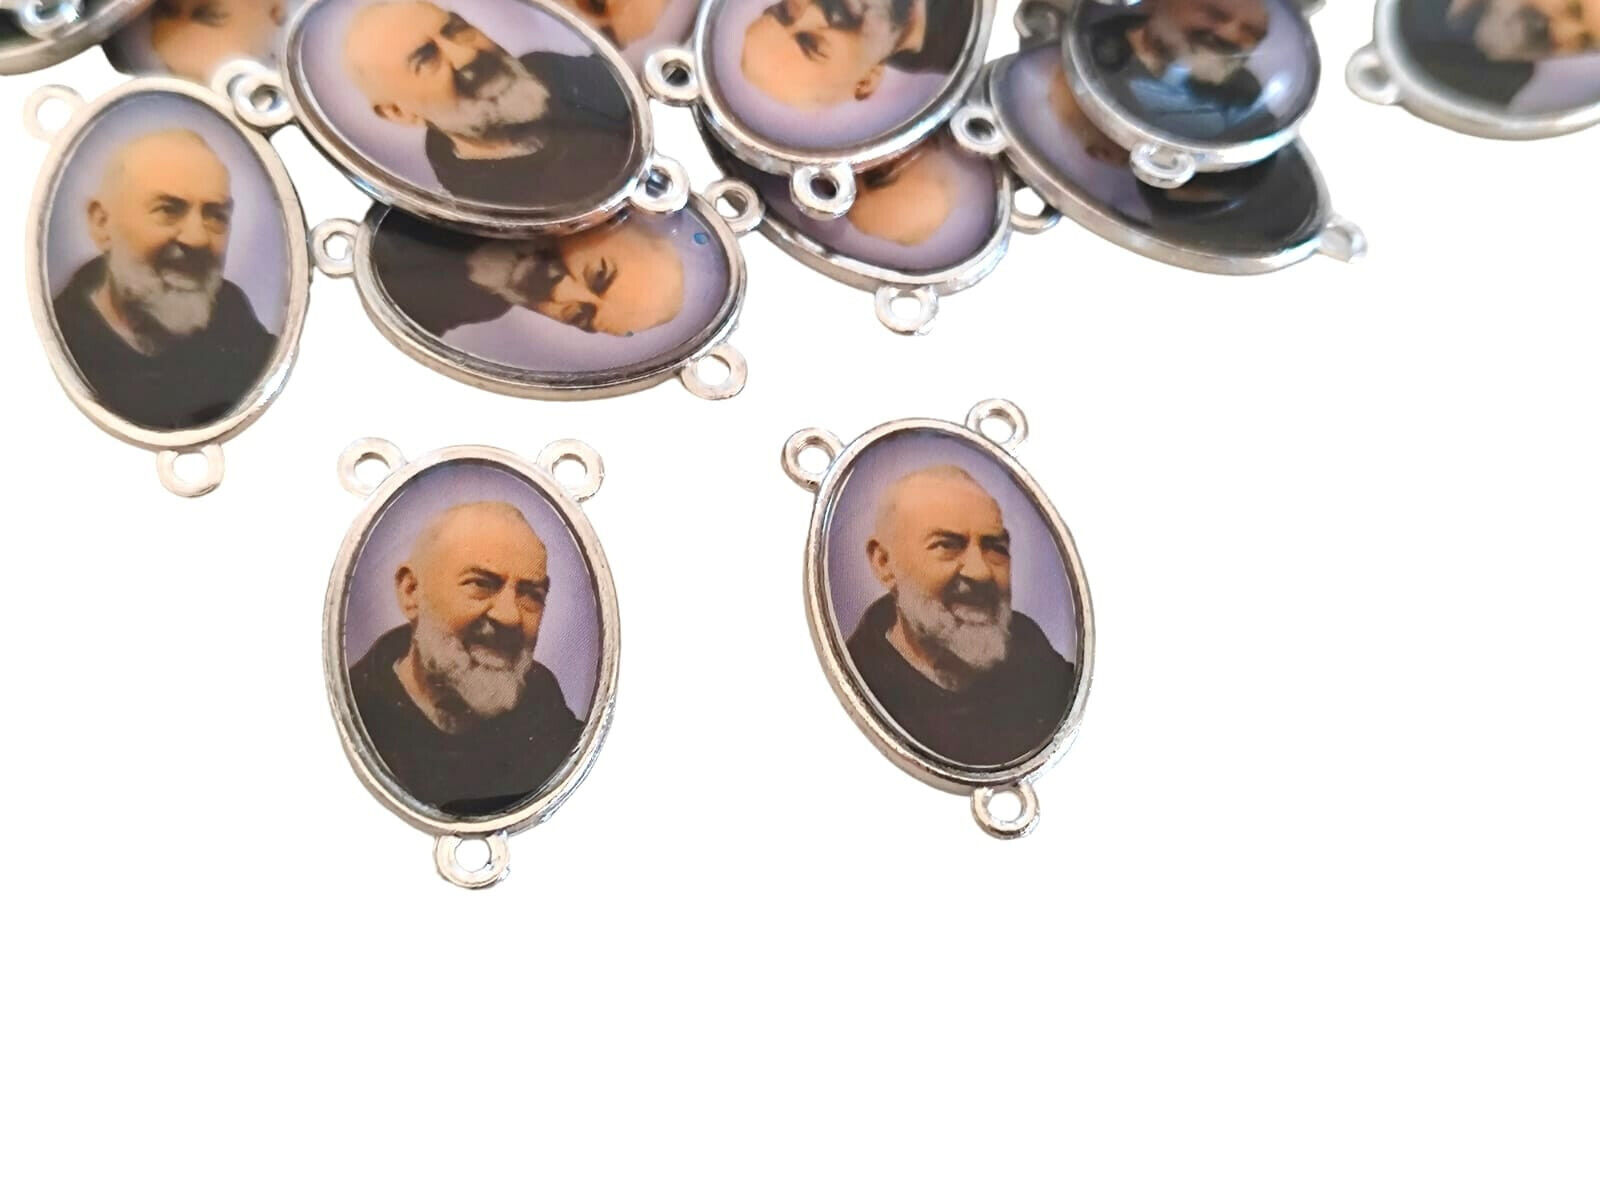 center rosary St. Padre Pio 10 pcs, Holy medals, catholic 10 pcs medals  Part